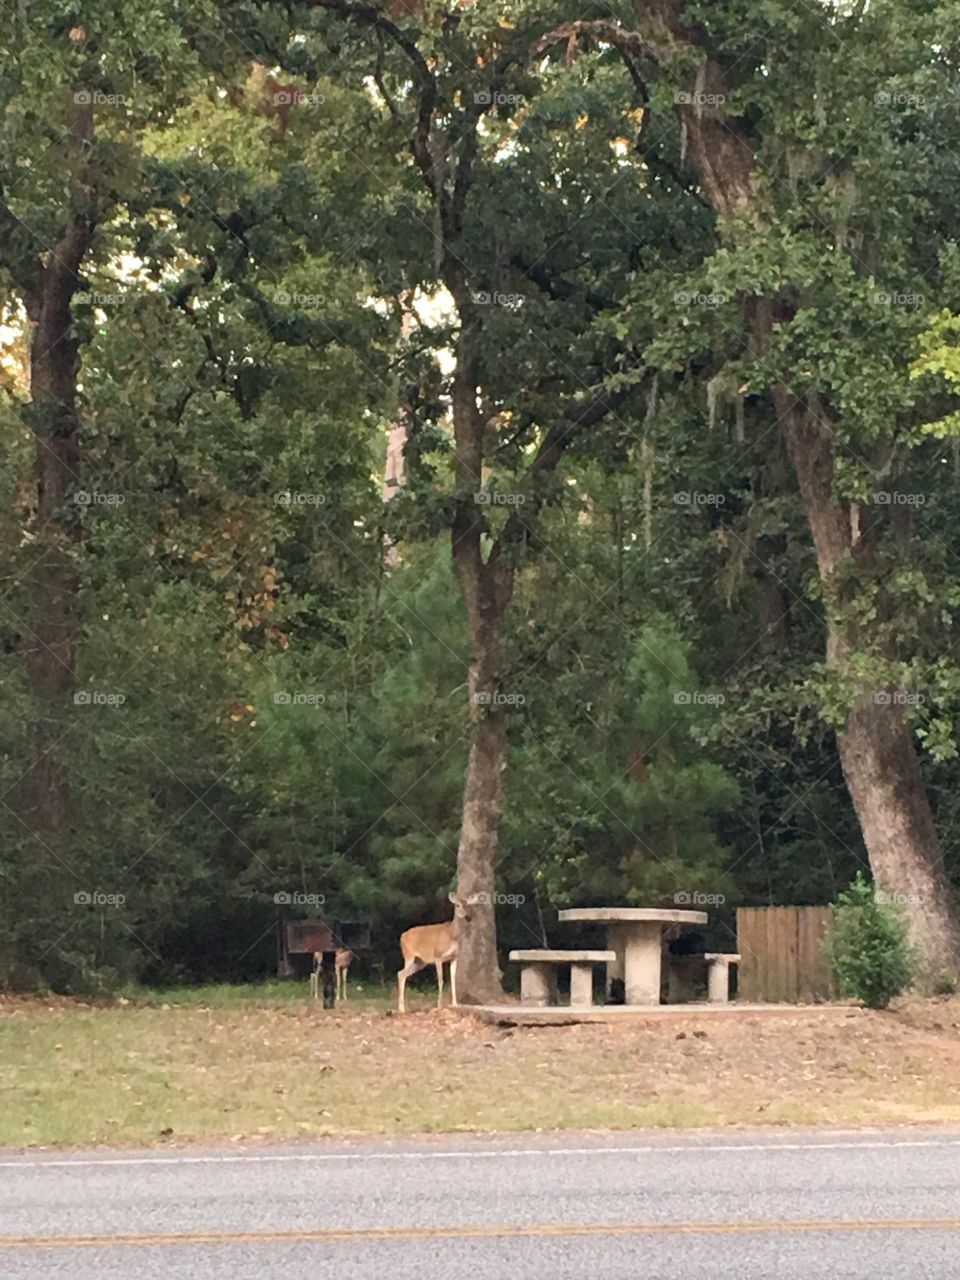 A deer in the park 